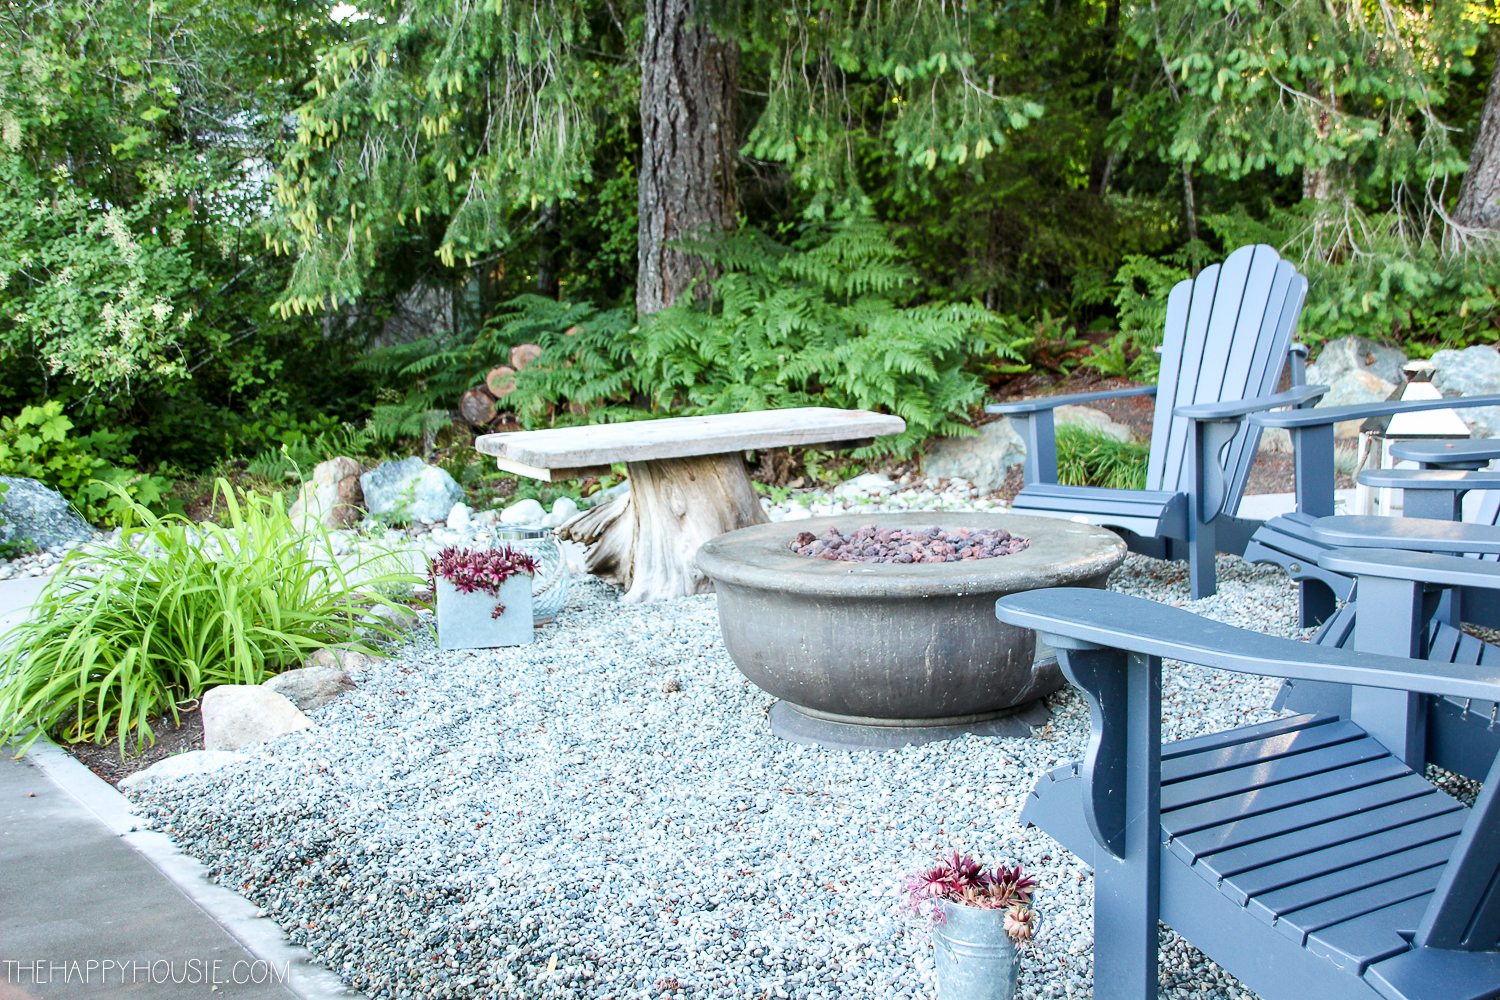 Pea Gravel Patio Pros and Cons